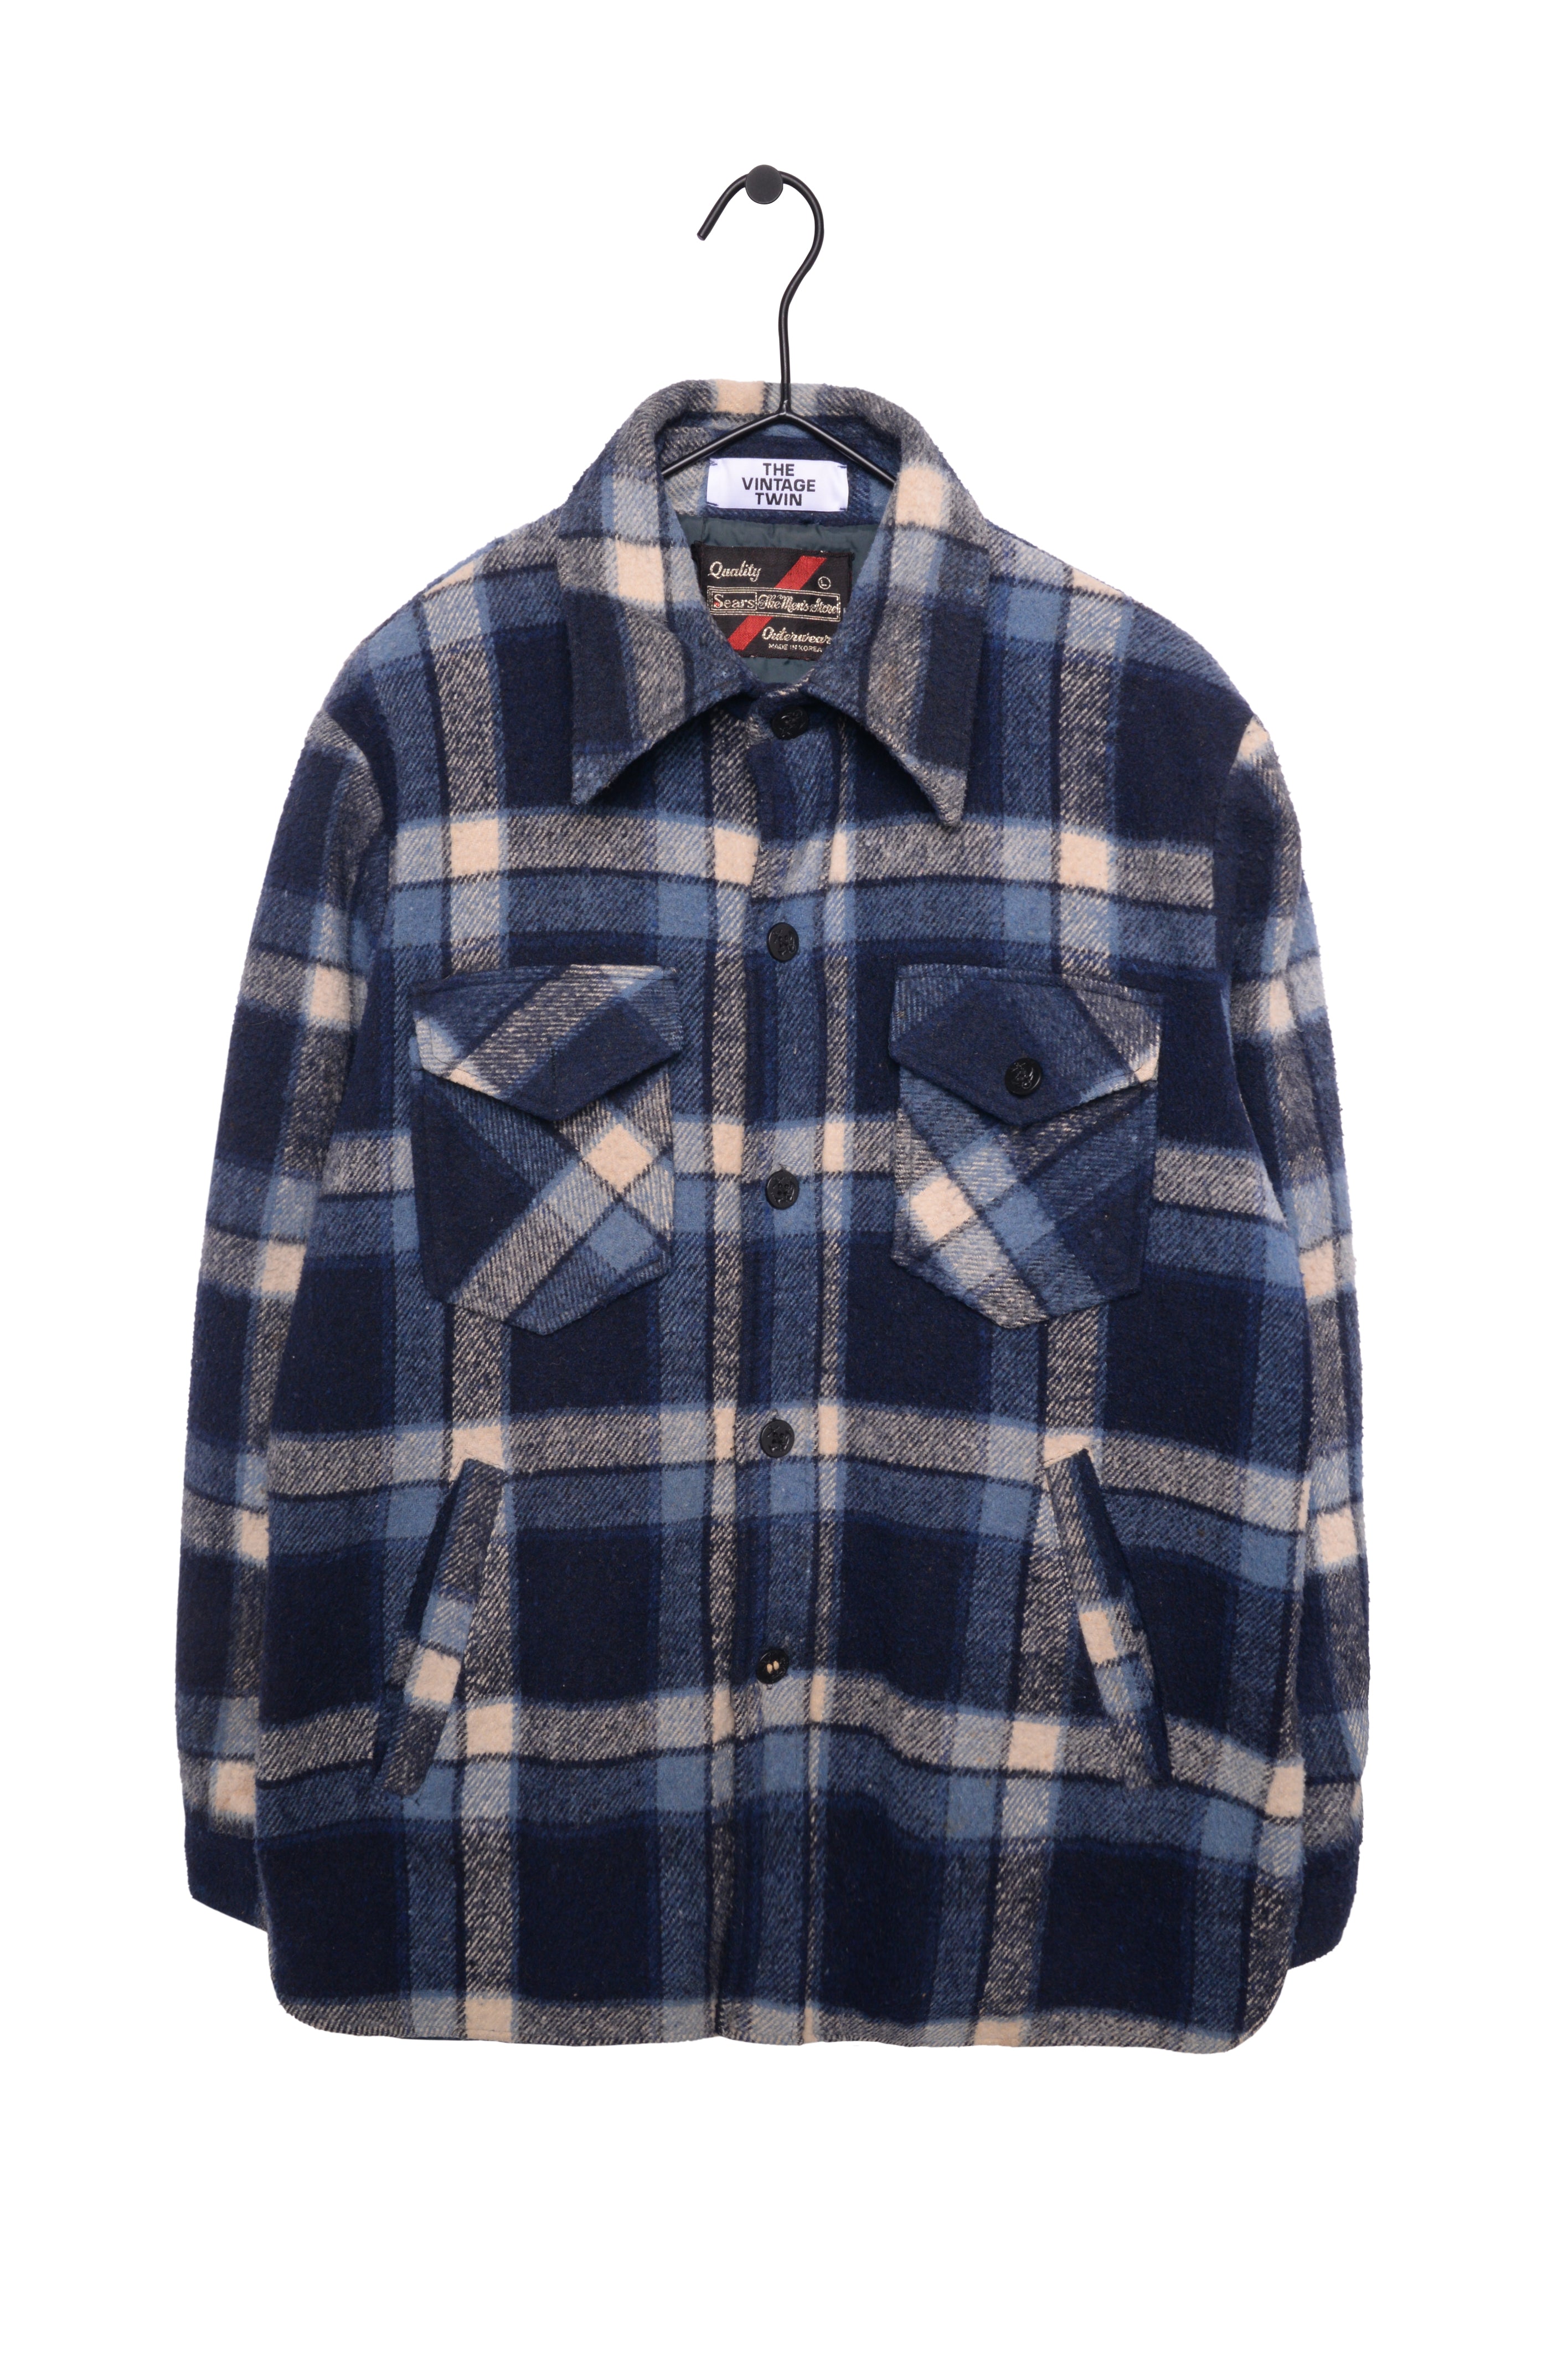 Wool Flannel Jacket Free Shipping - The Vintage Twin